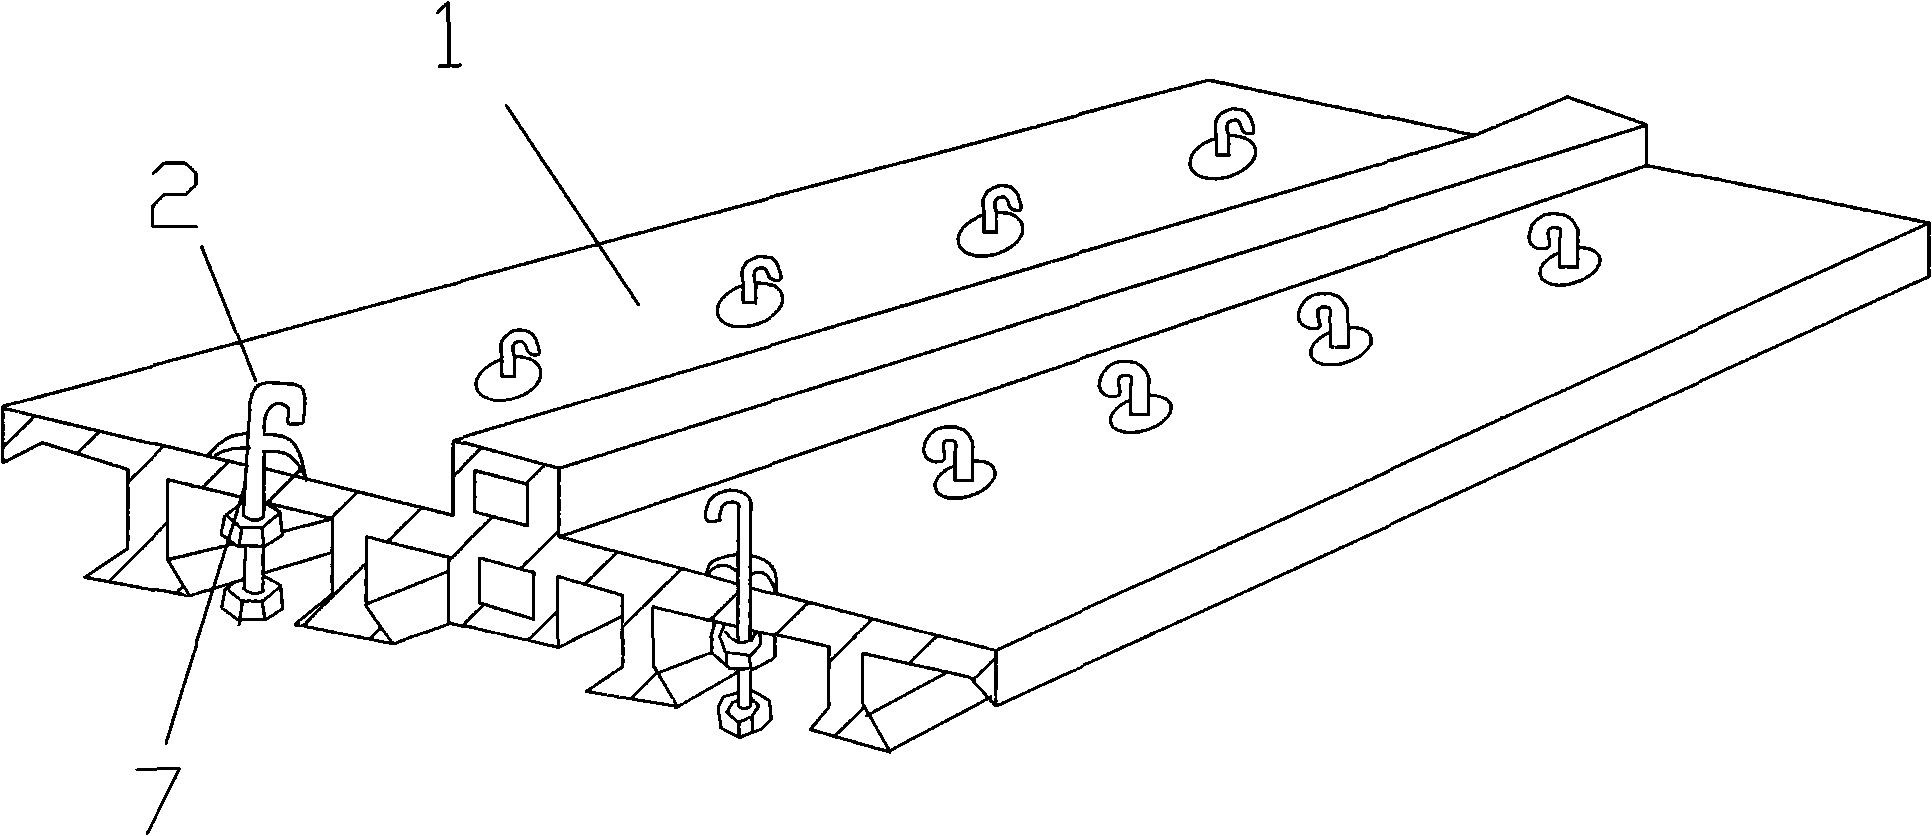 Internal-bonded water-proof technique for externally-bonded waterstop